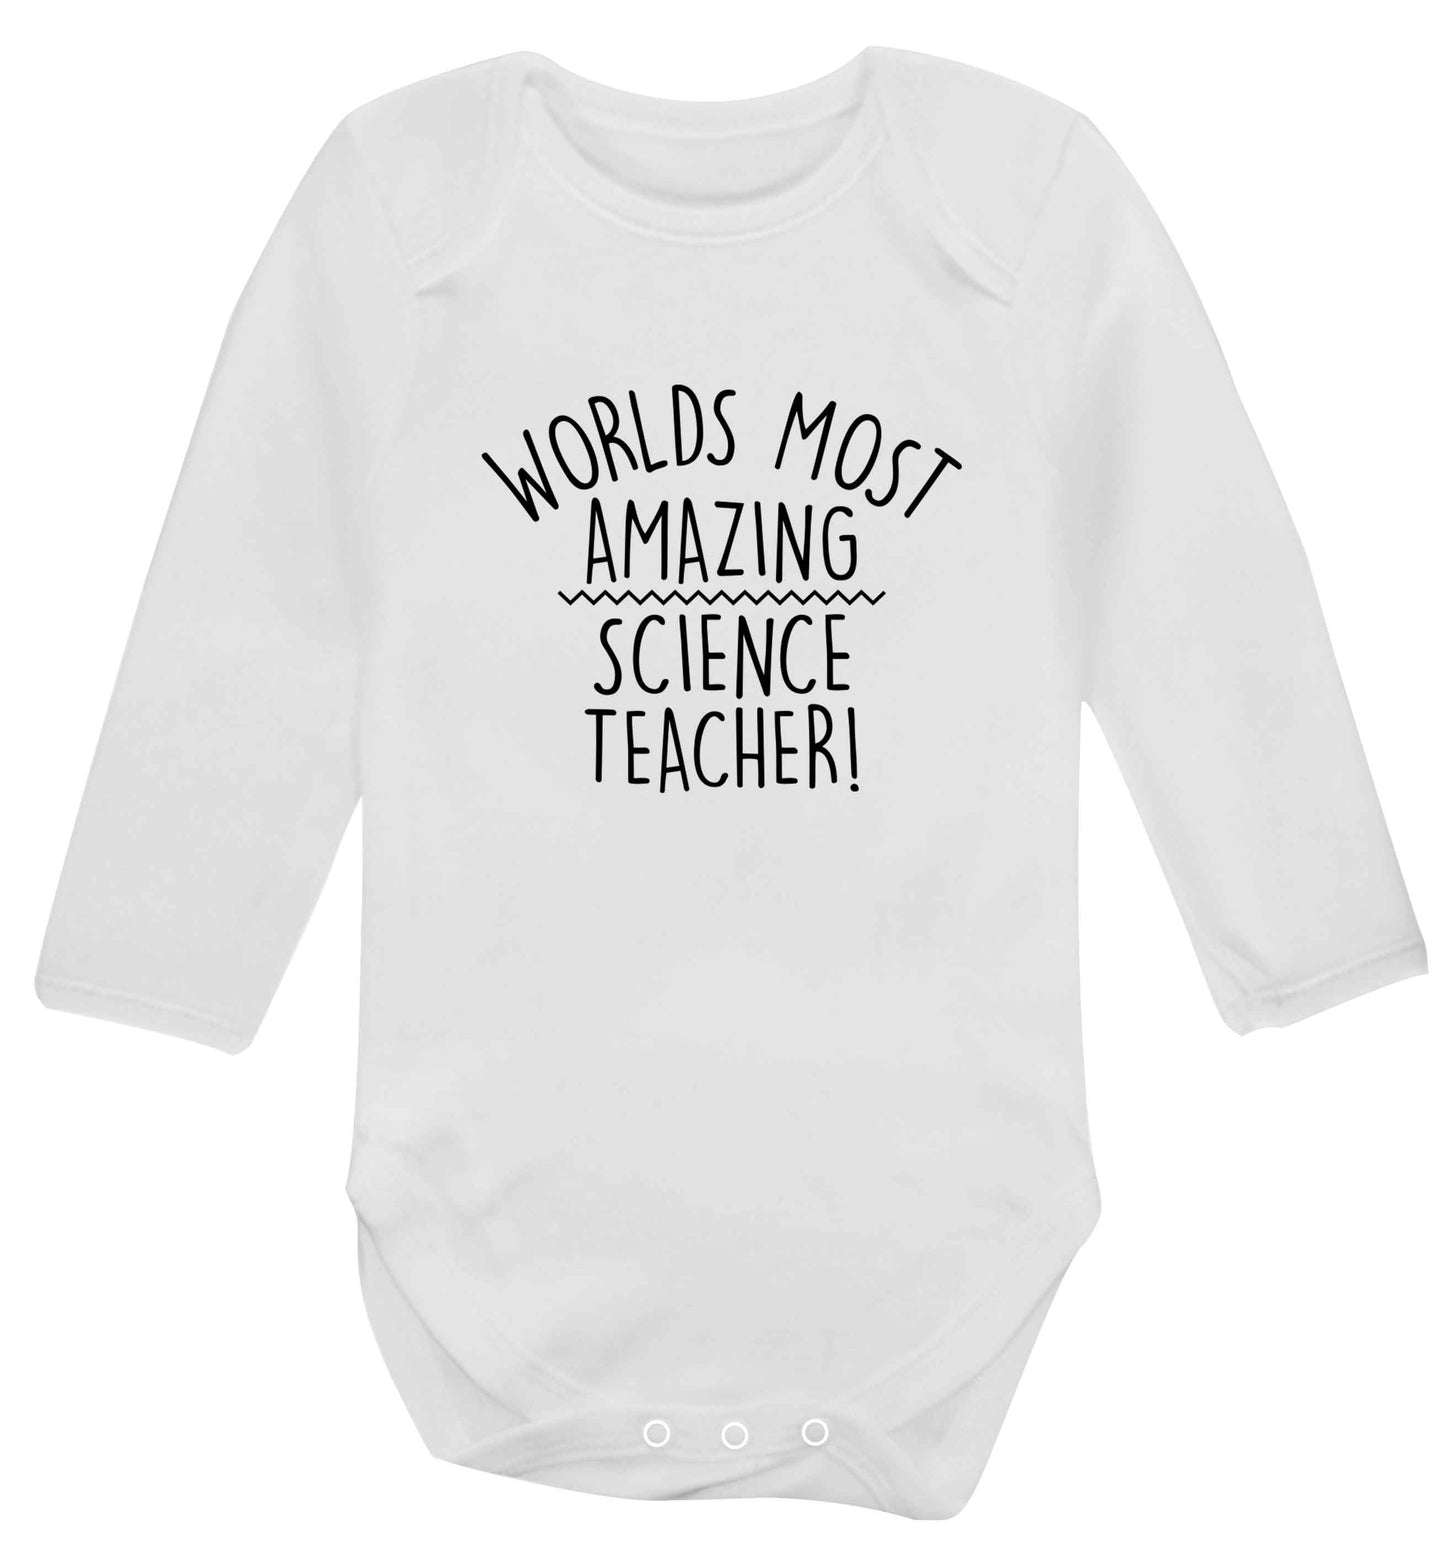 Worlds most amazing science teacher baby vest long sleeved white 6-12 months